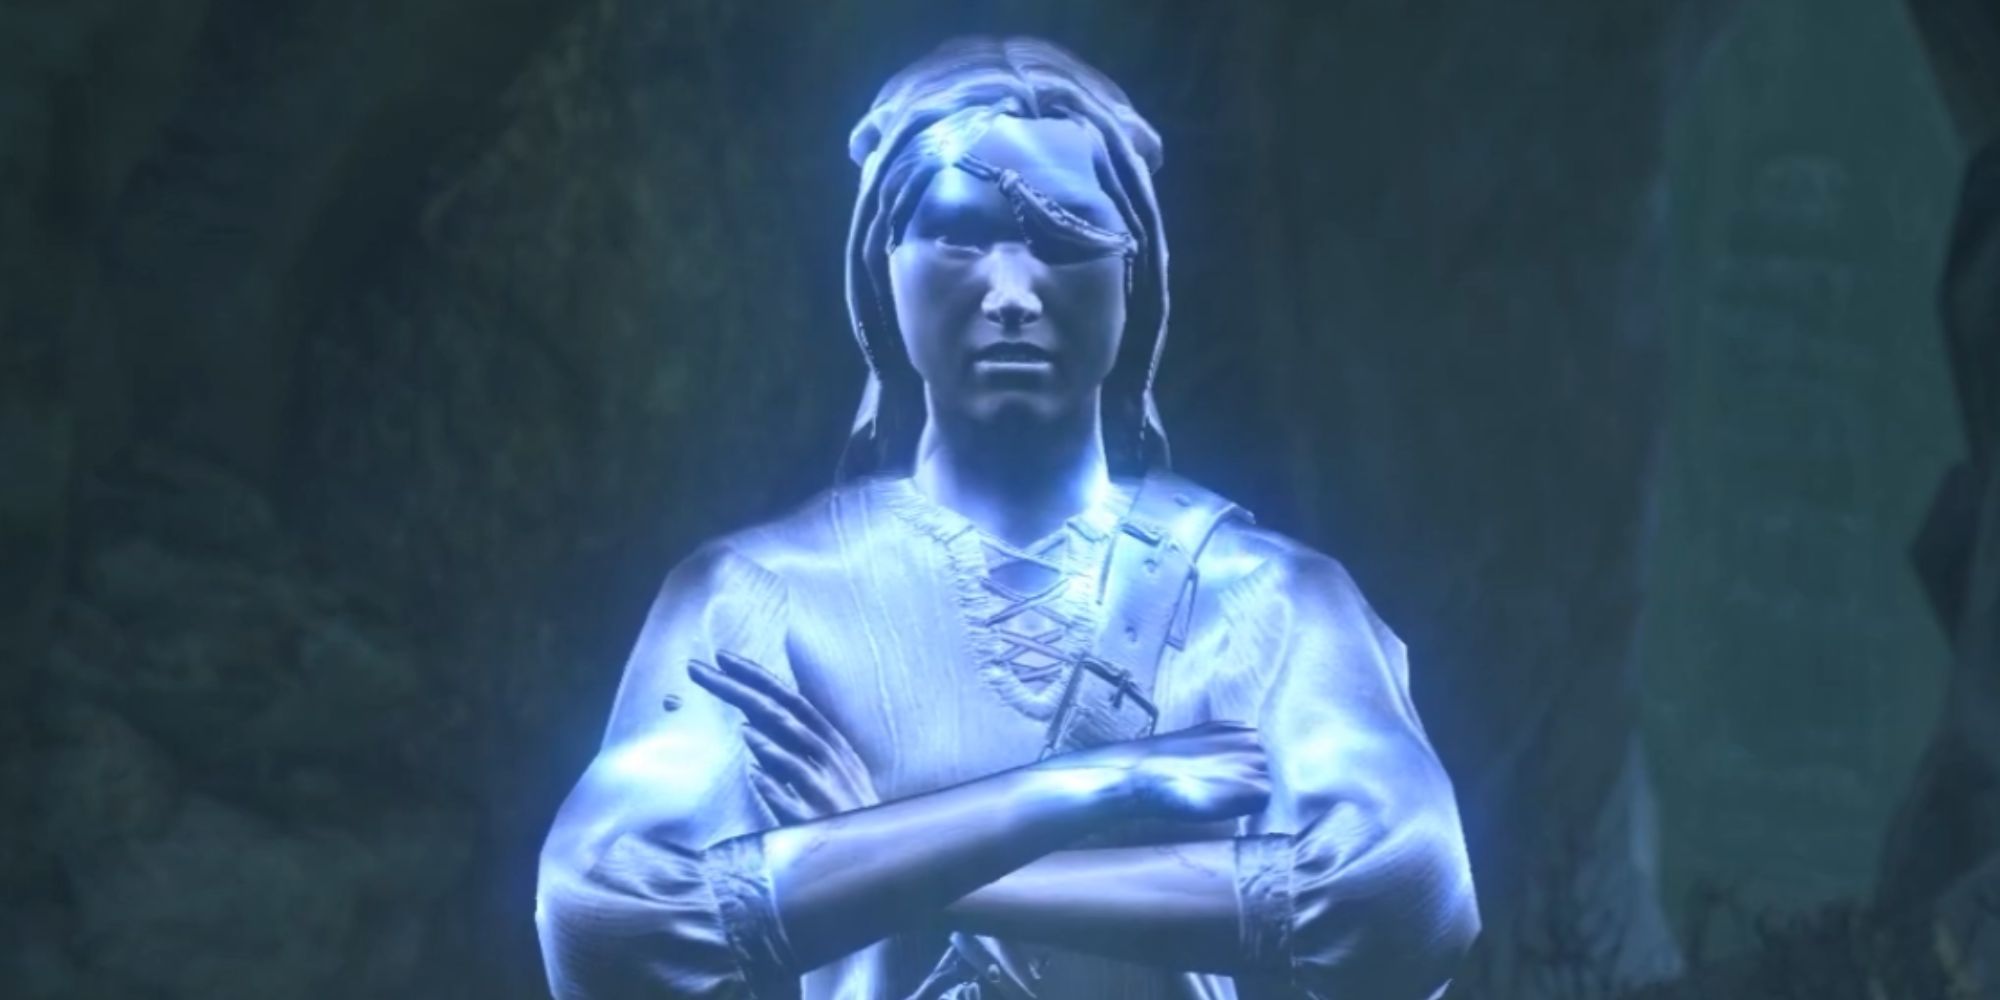 ESO Ghost Of Vanisande Maul Speaking To The Player